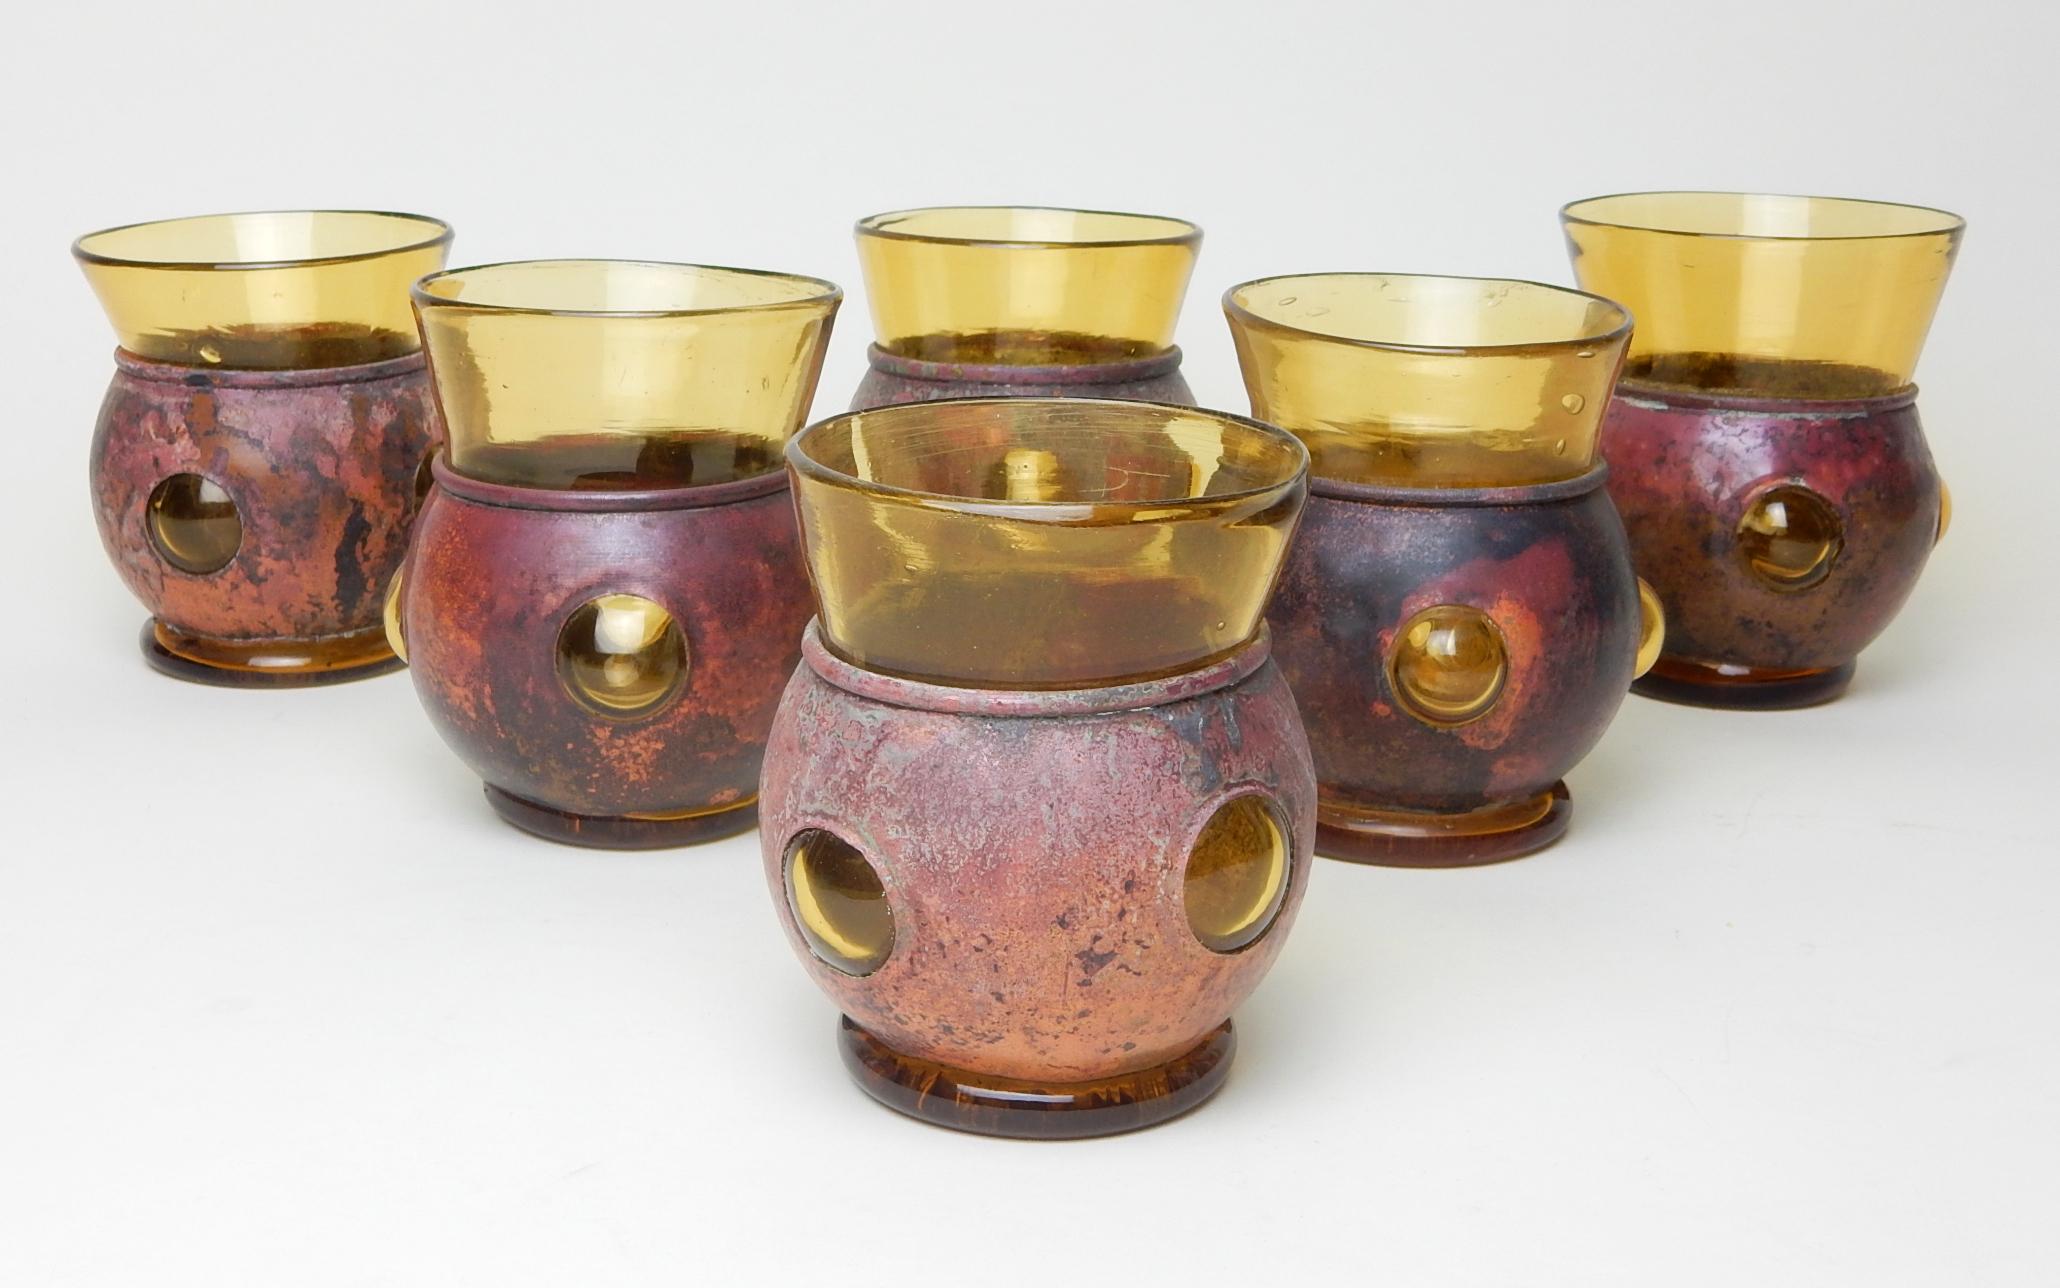 Amazing set of 6 imprisoned blown glass tumblers by artist Felipe Derflingher.
These are sculpted of hand blown amber glass into a rare flamed copper shell.
The color, age and patina in gorgeous. All are in excellent condition.
Their hand and